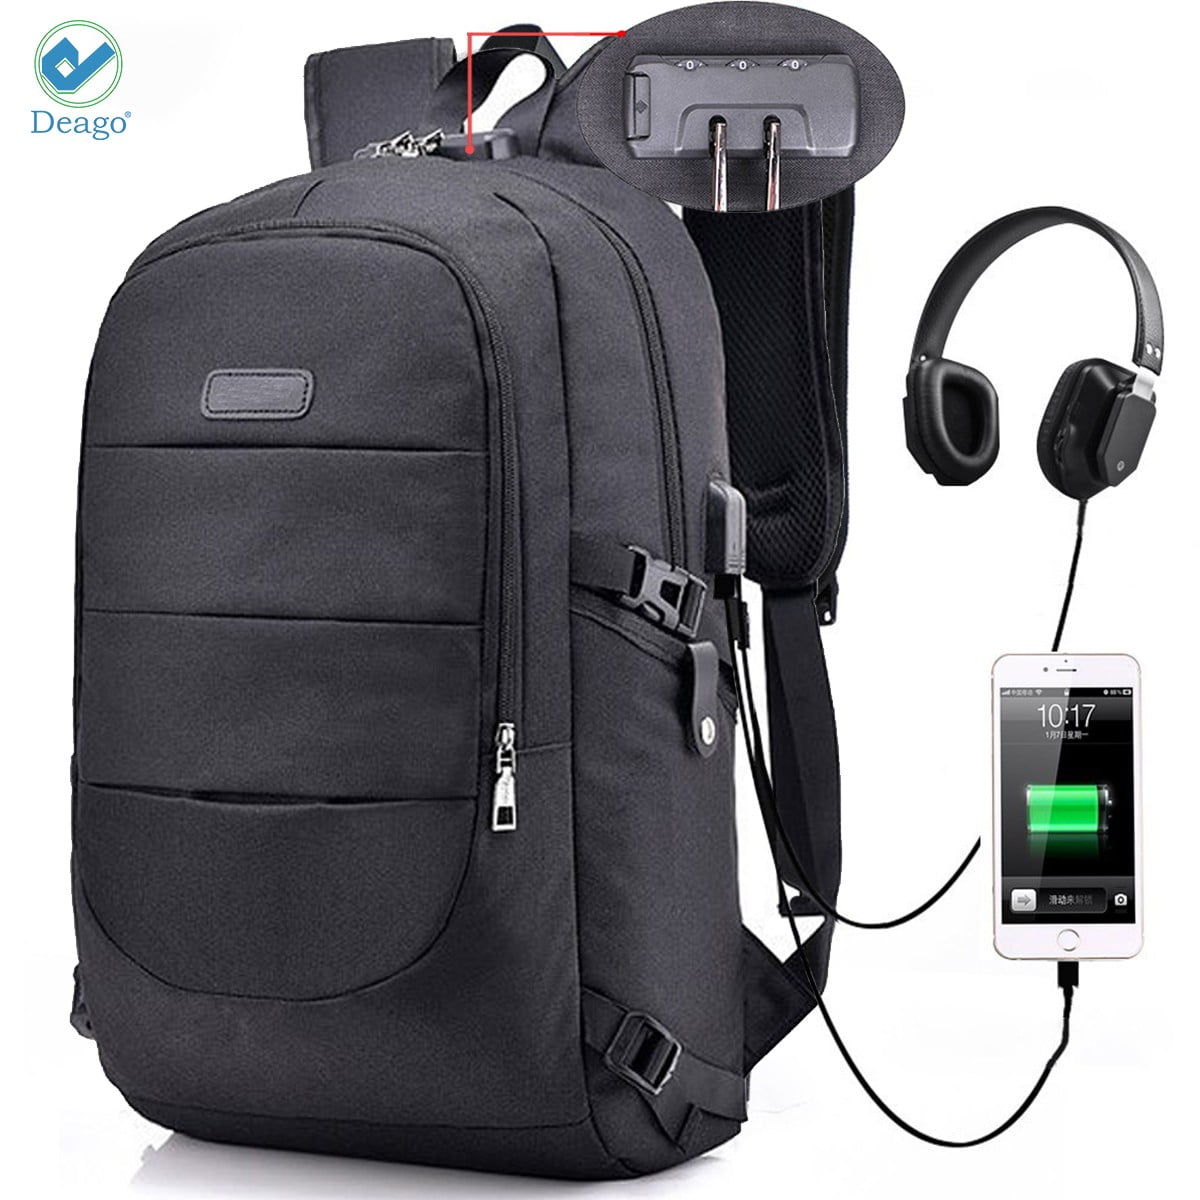 Deago Laptop Backpack, Business Anti Theft with lock Waterproof Travel ...